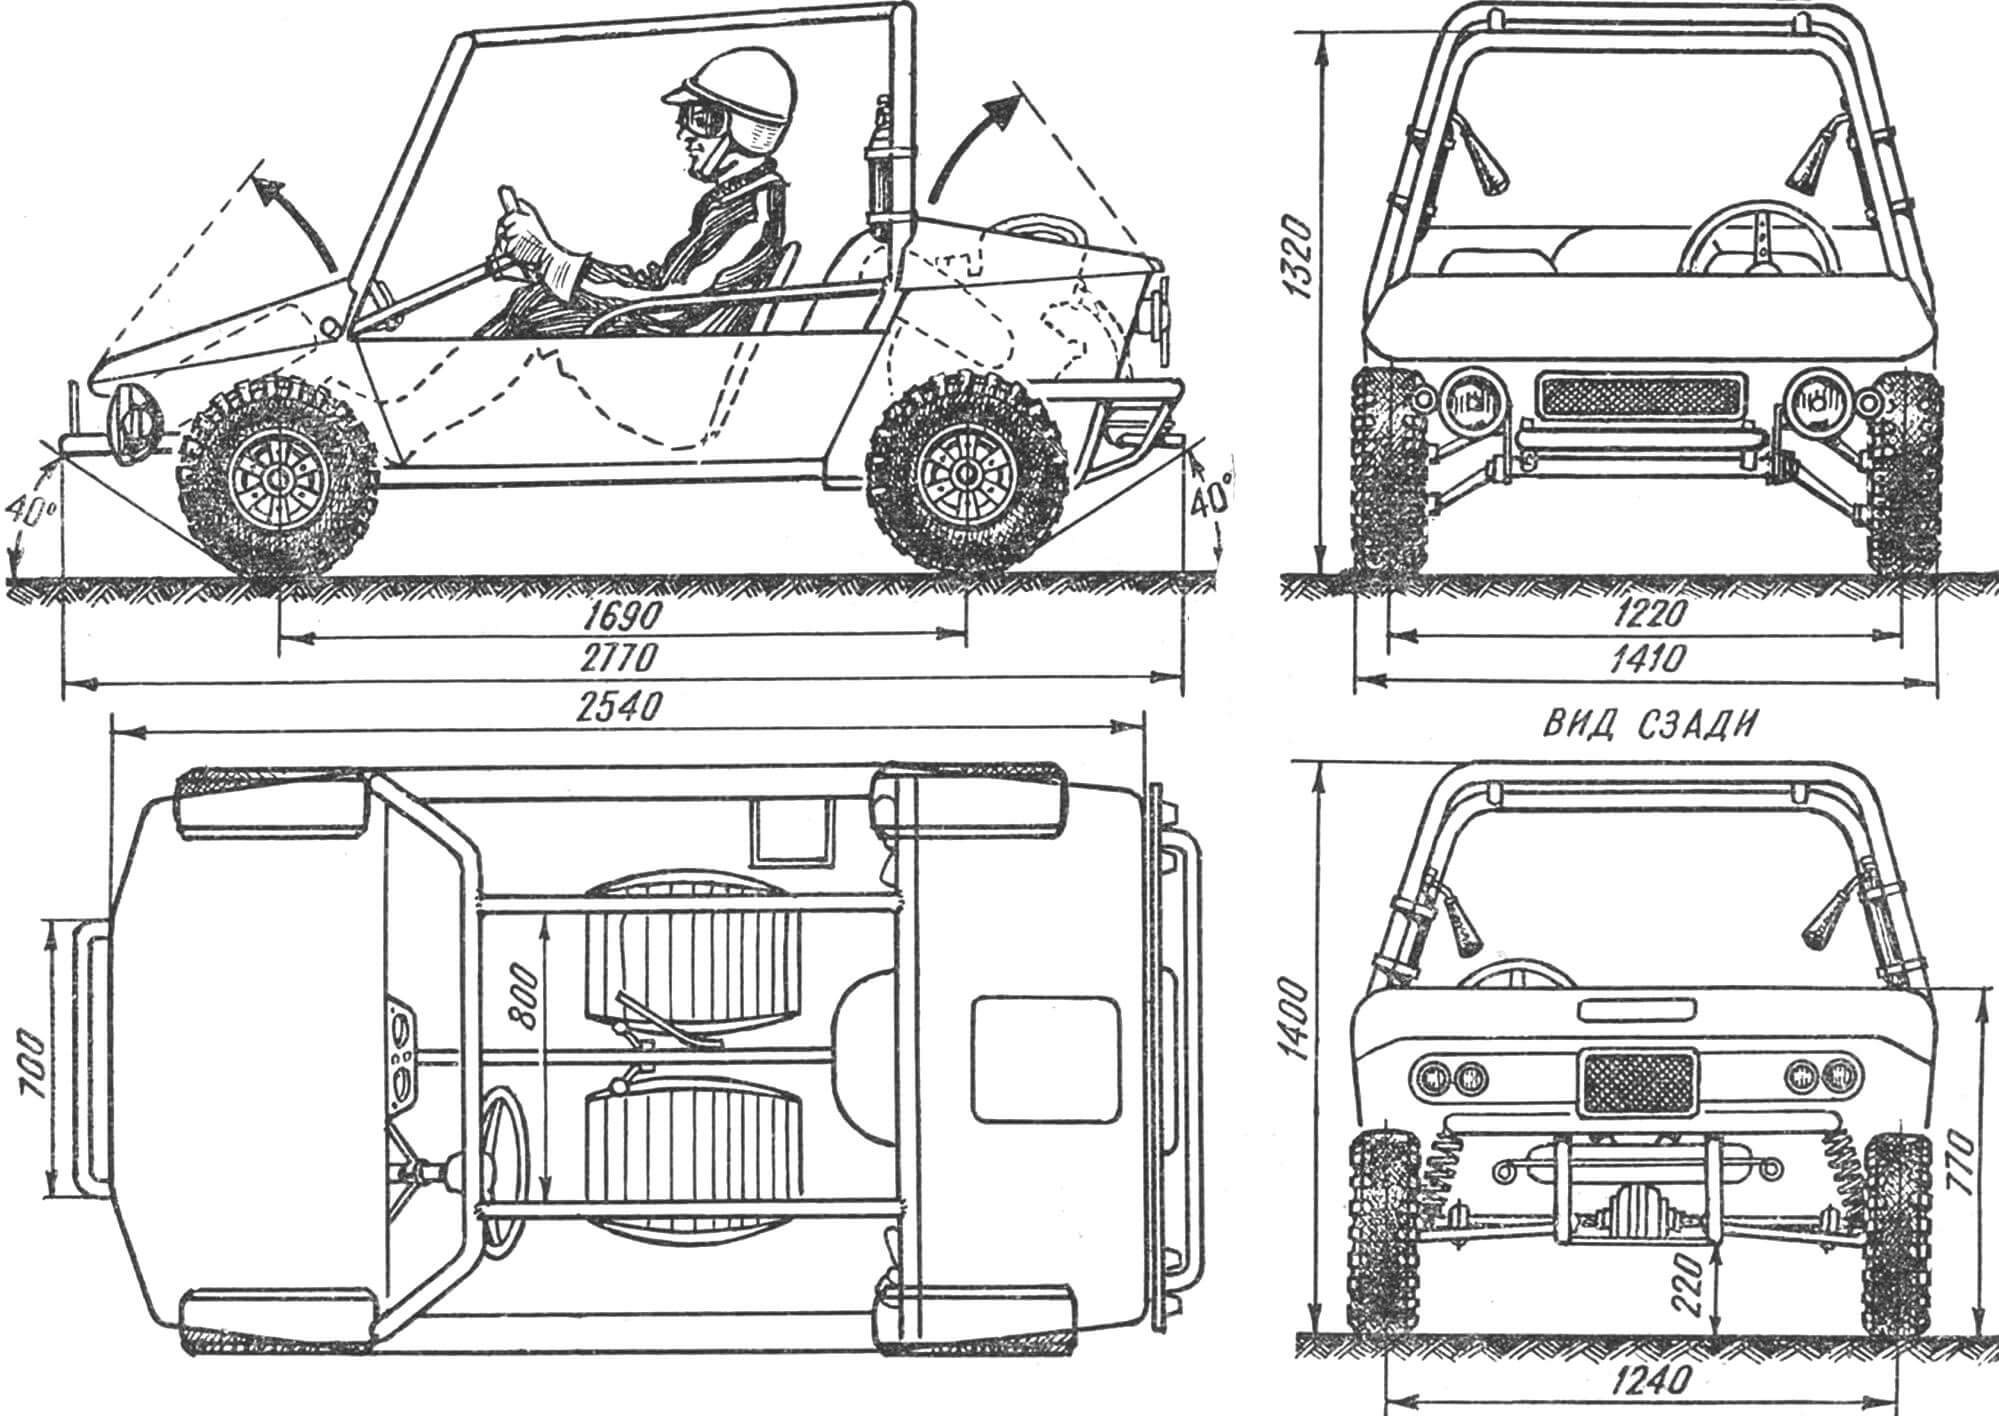 Rice. 2. Diagram of the KVP buggy microcar in four projections.